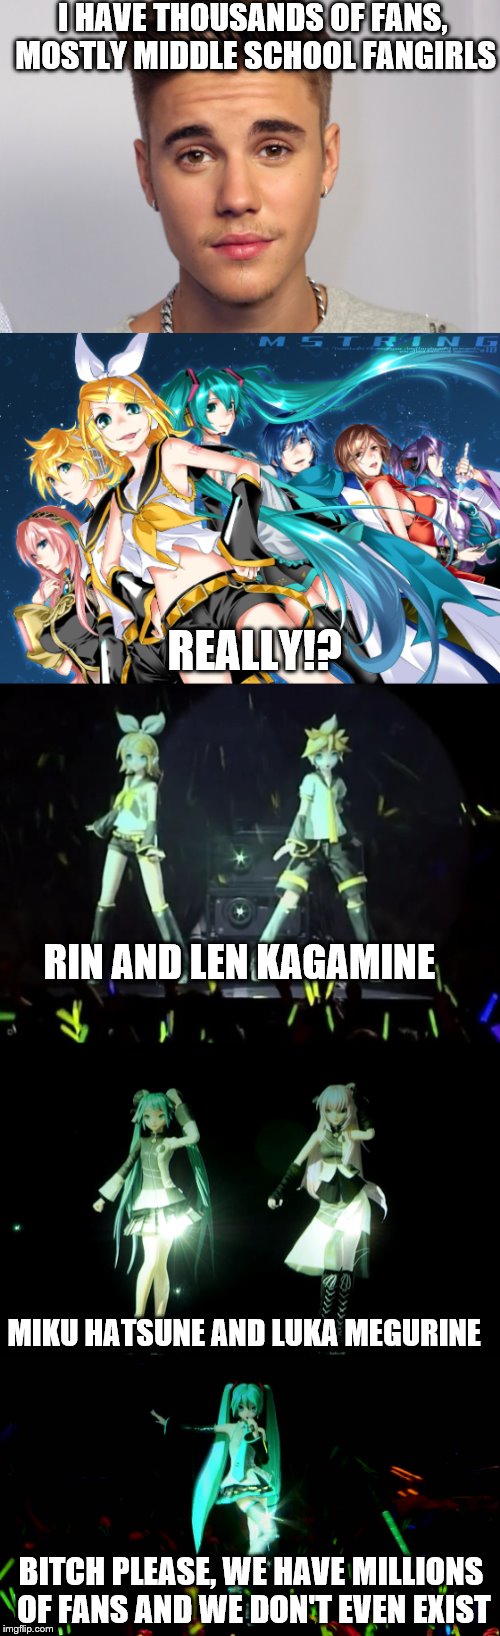 Justin Bieber vs Vocaloid | I HAVE THOUSANDS OF FANS, MOSTLY MIDDLE SCHOOL FANGIRLS; REALLY!? RIN AND LEN KAGAMINE; MIKU HATSUNE AND LUKA MEGURINE; BITCH PLEASE, WE HAVE MILLIONS OF FANS AND WE DON'T EVEN EXIST | image tagged in justin bieber,vocaloid,miku,megurine luka,rinxlen mikuxluka,rin and len kagamine | made w/ Imgflip meme maker